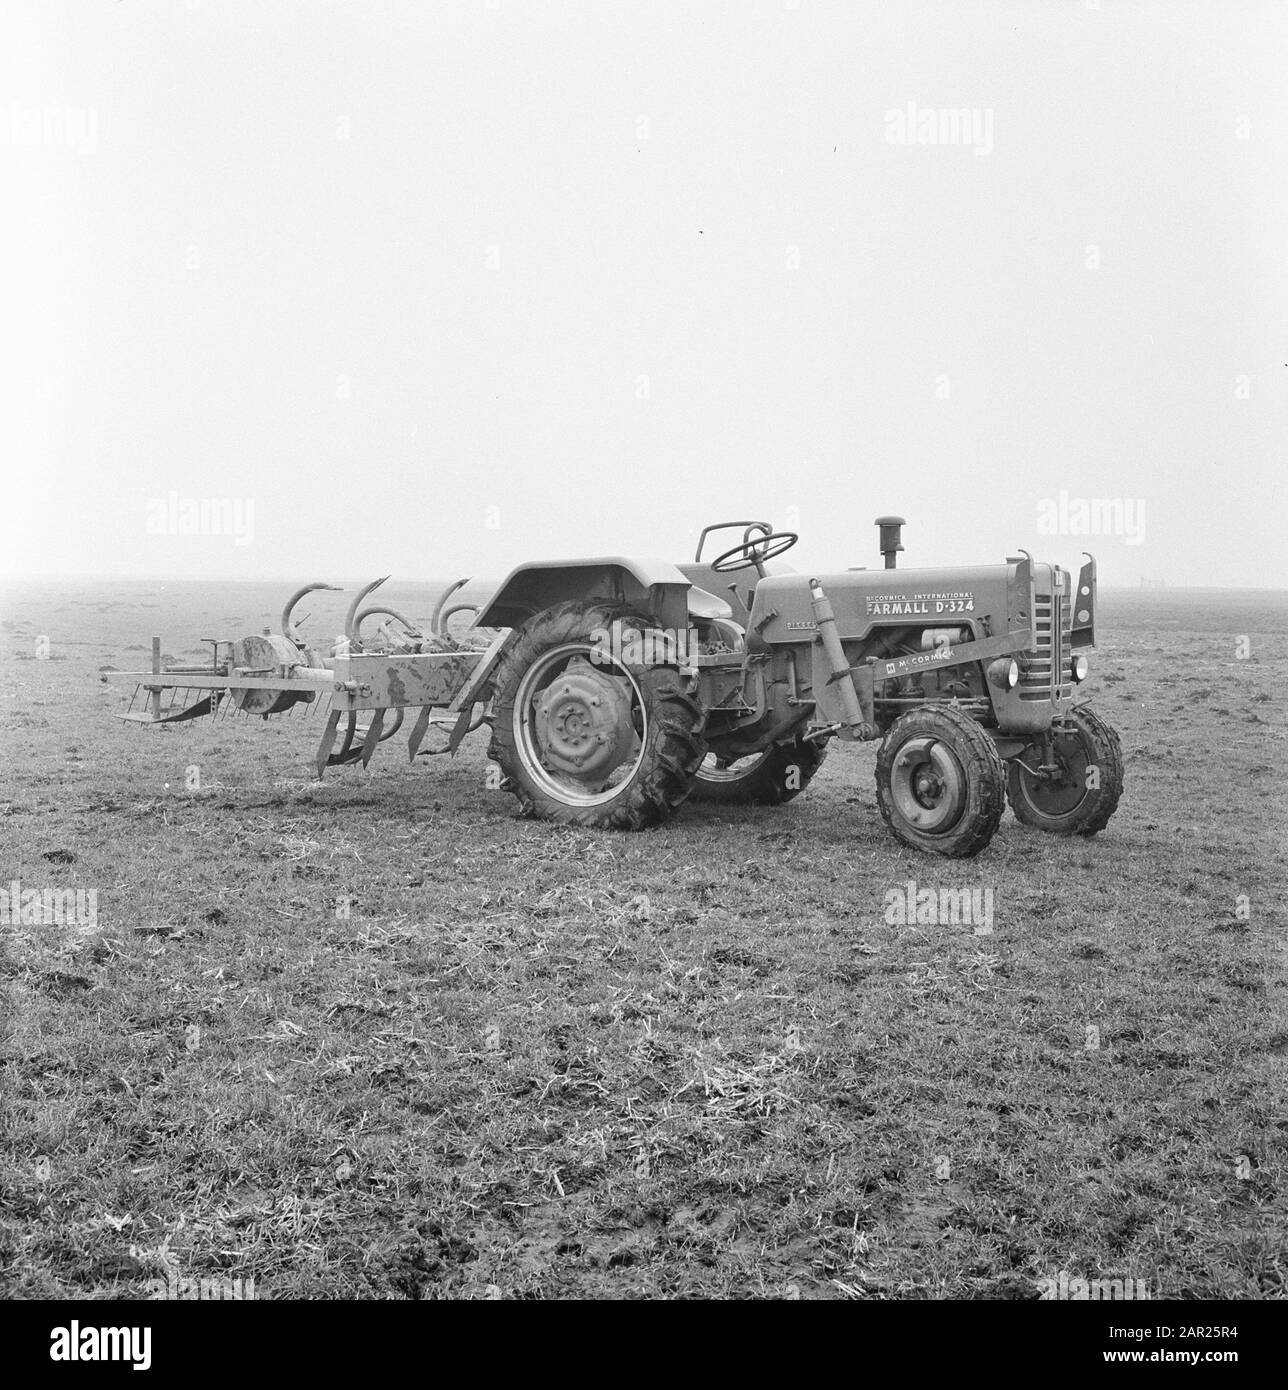 agricultural machinery and implements, work, spinning machines, rottaspa Date: March 1958 Location: Zevenhuizen Keywords: agricultural machinery and tools, spreading, work Personal name: rotaspa Stock Photo